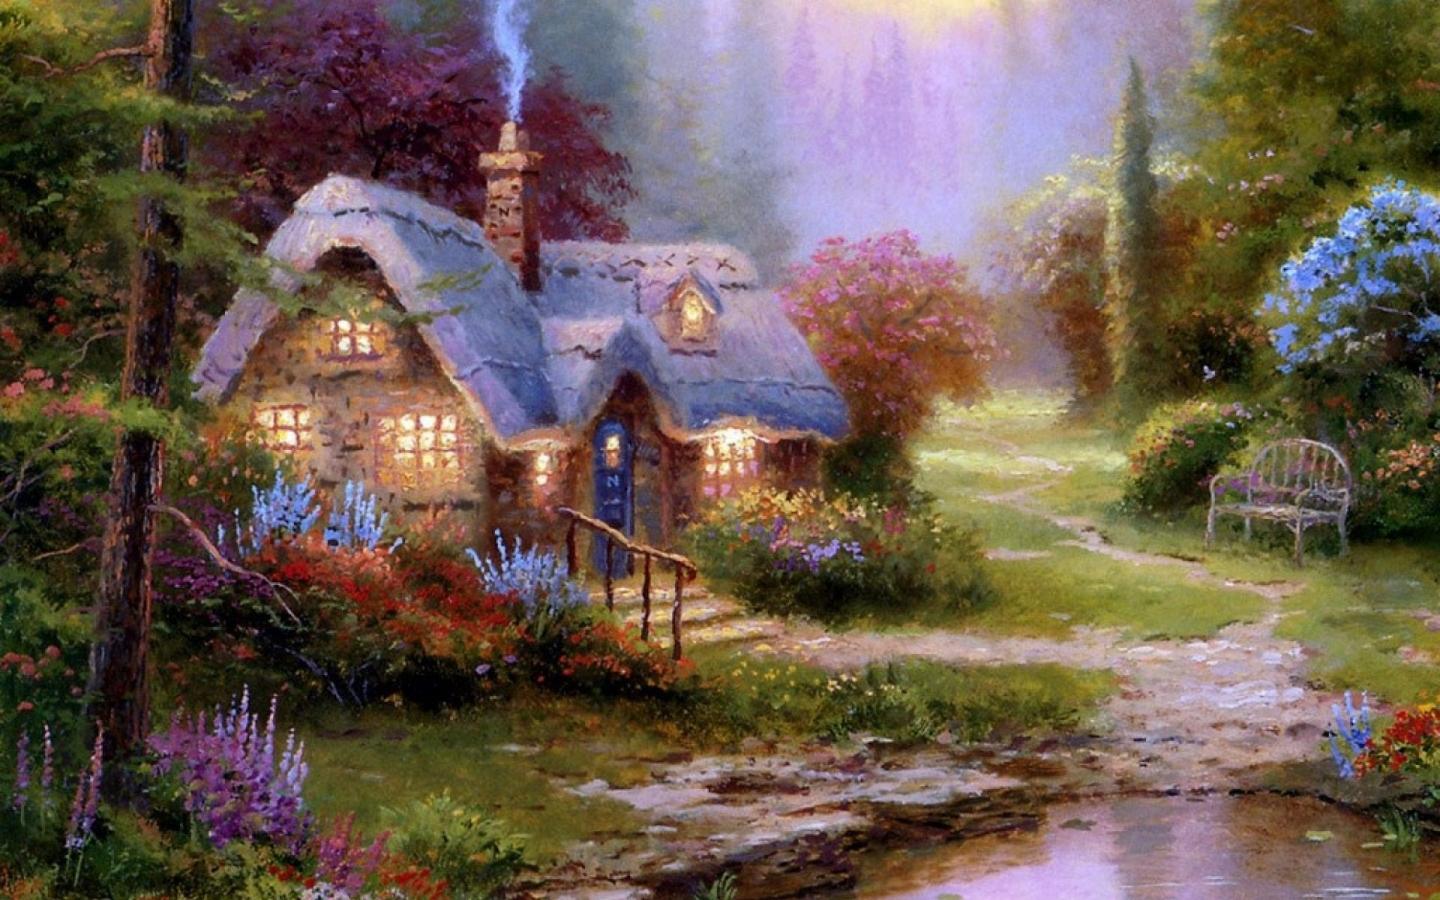 Fairy house 1440x900 Wallpaper, 1440x900 Wallpaper & Picture Free